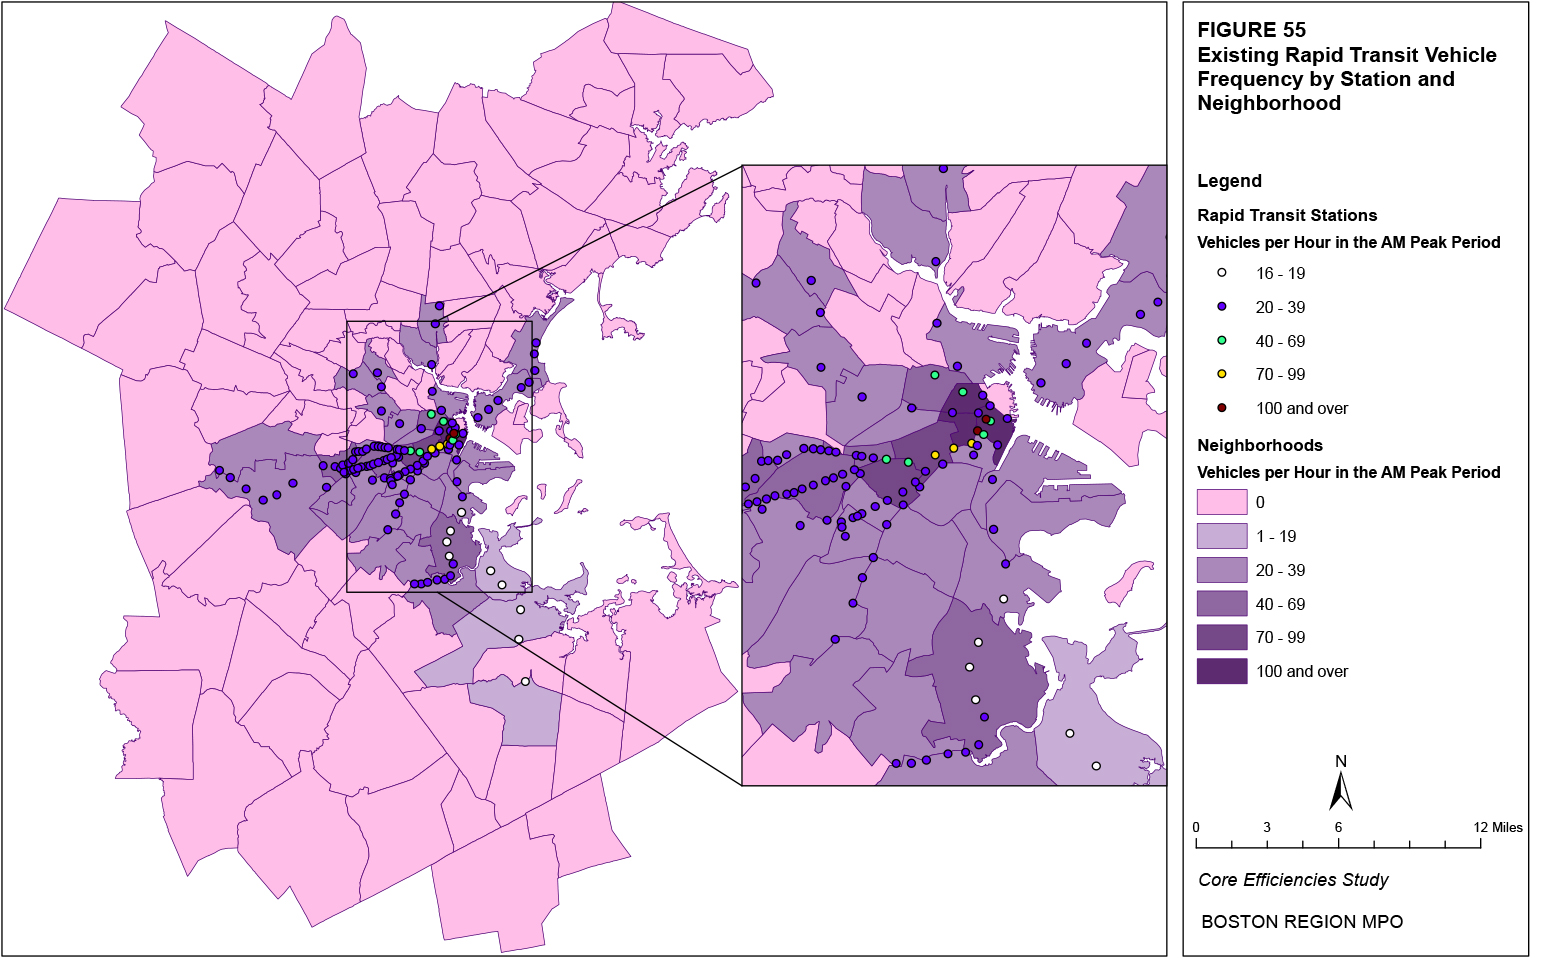 This map shows the existing AM peak rapid transit frequency (vehicles per hour) by station and neighborhood.